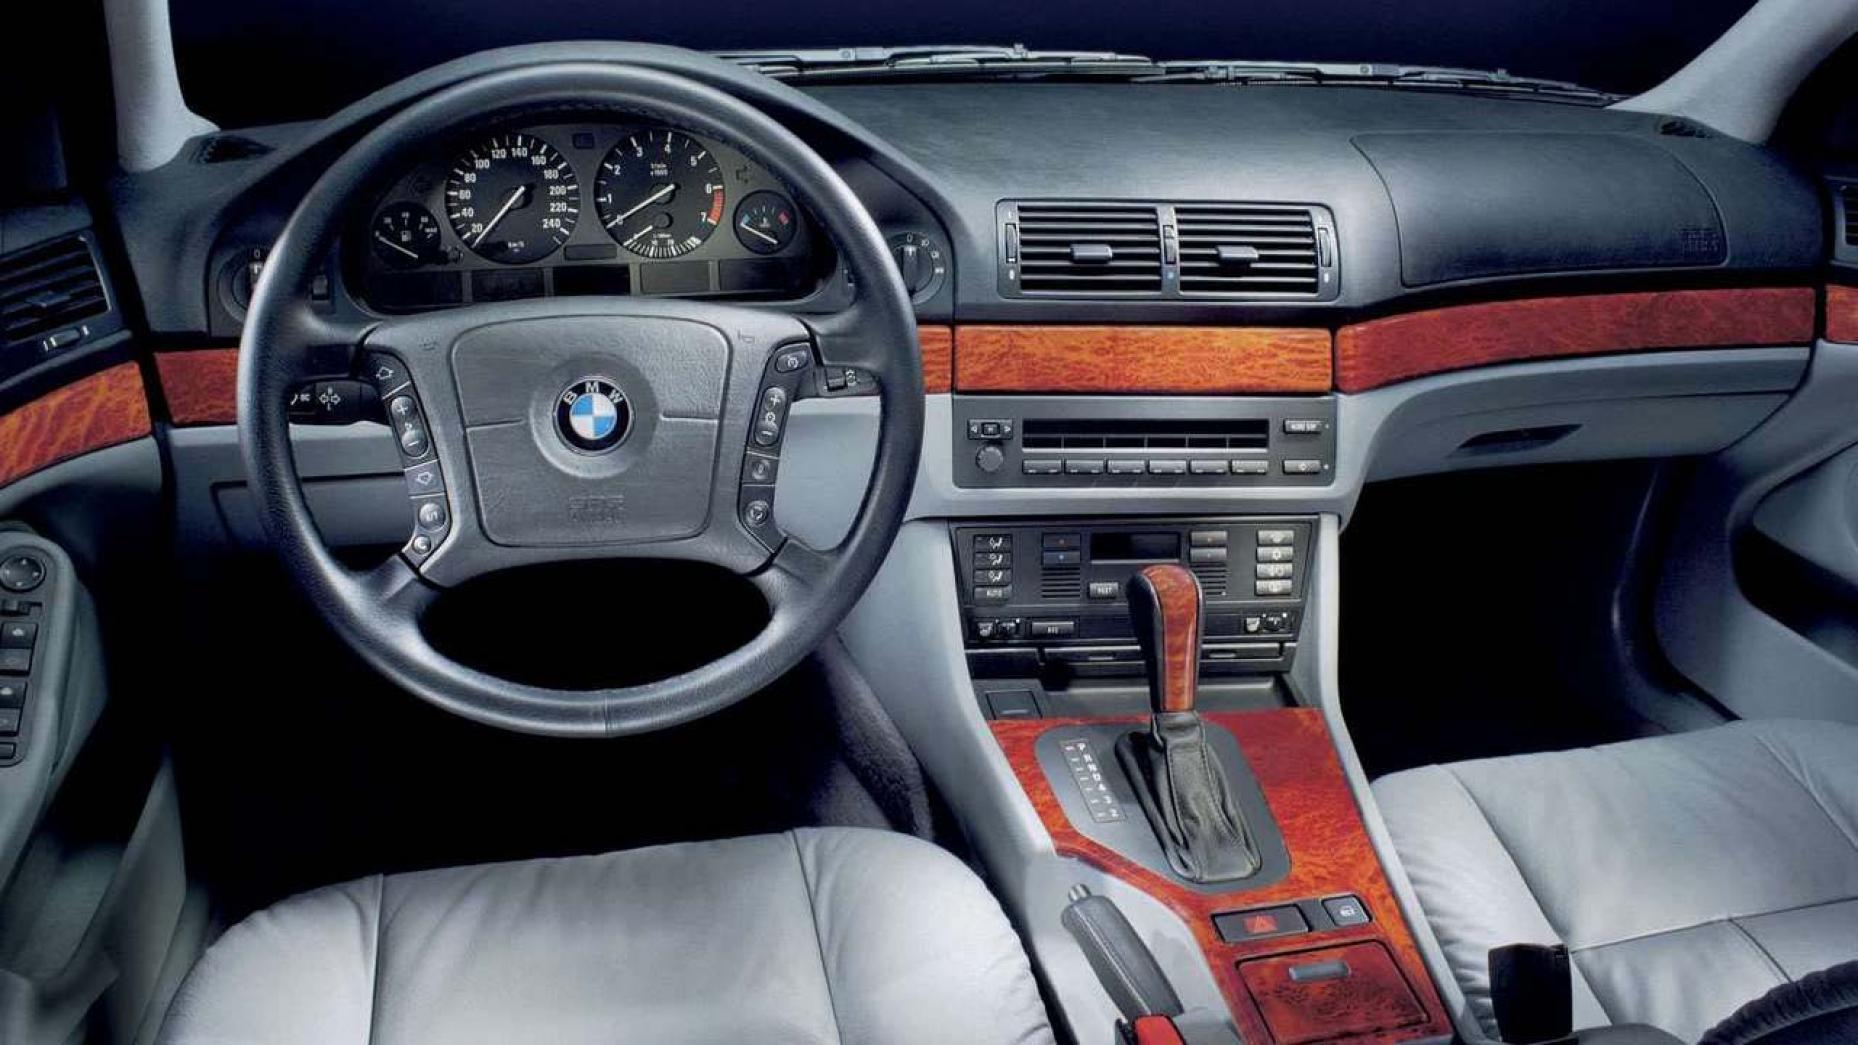 Top Gear's Top 9: the best classic car interior edition